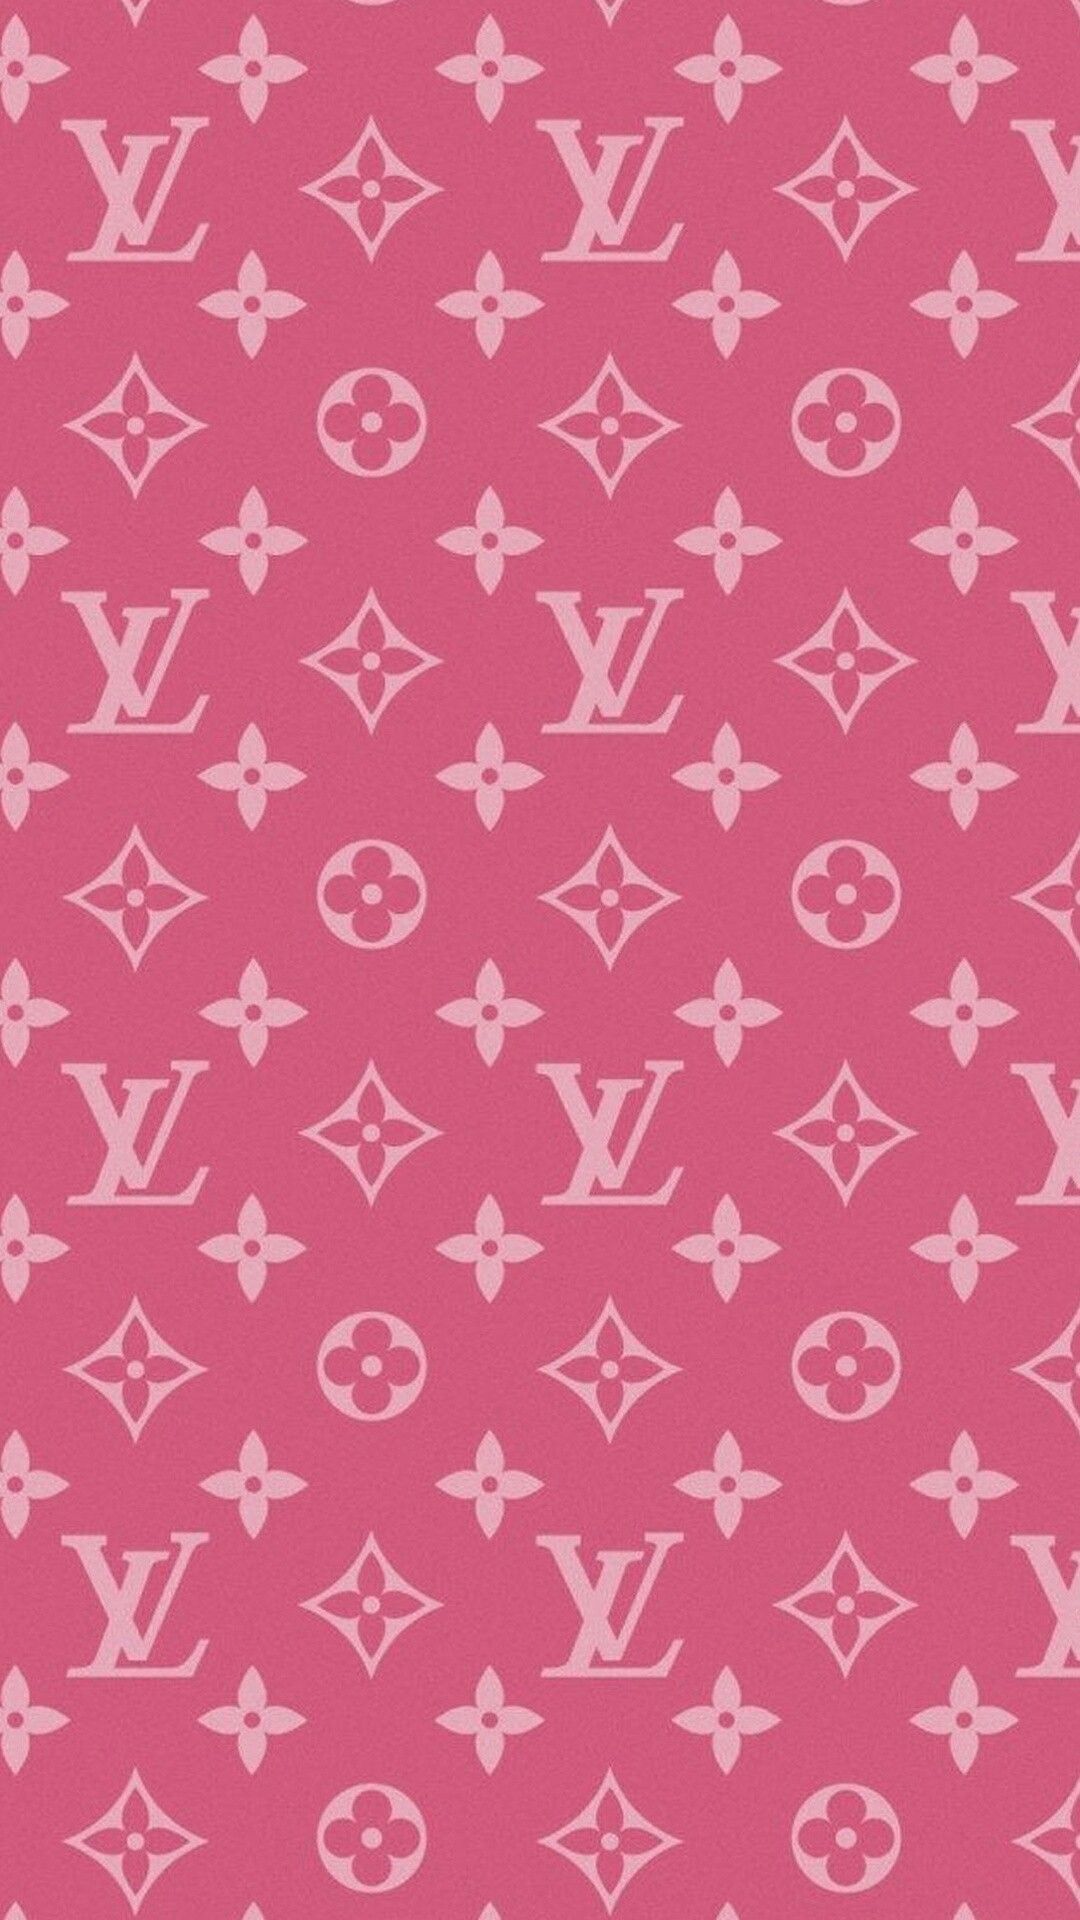 Pin by MAE creations on Sublimation  Louis vuitton iphone wallpaper,  Monogram wallpaper, Louis vuitton